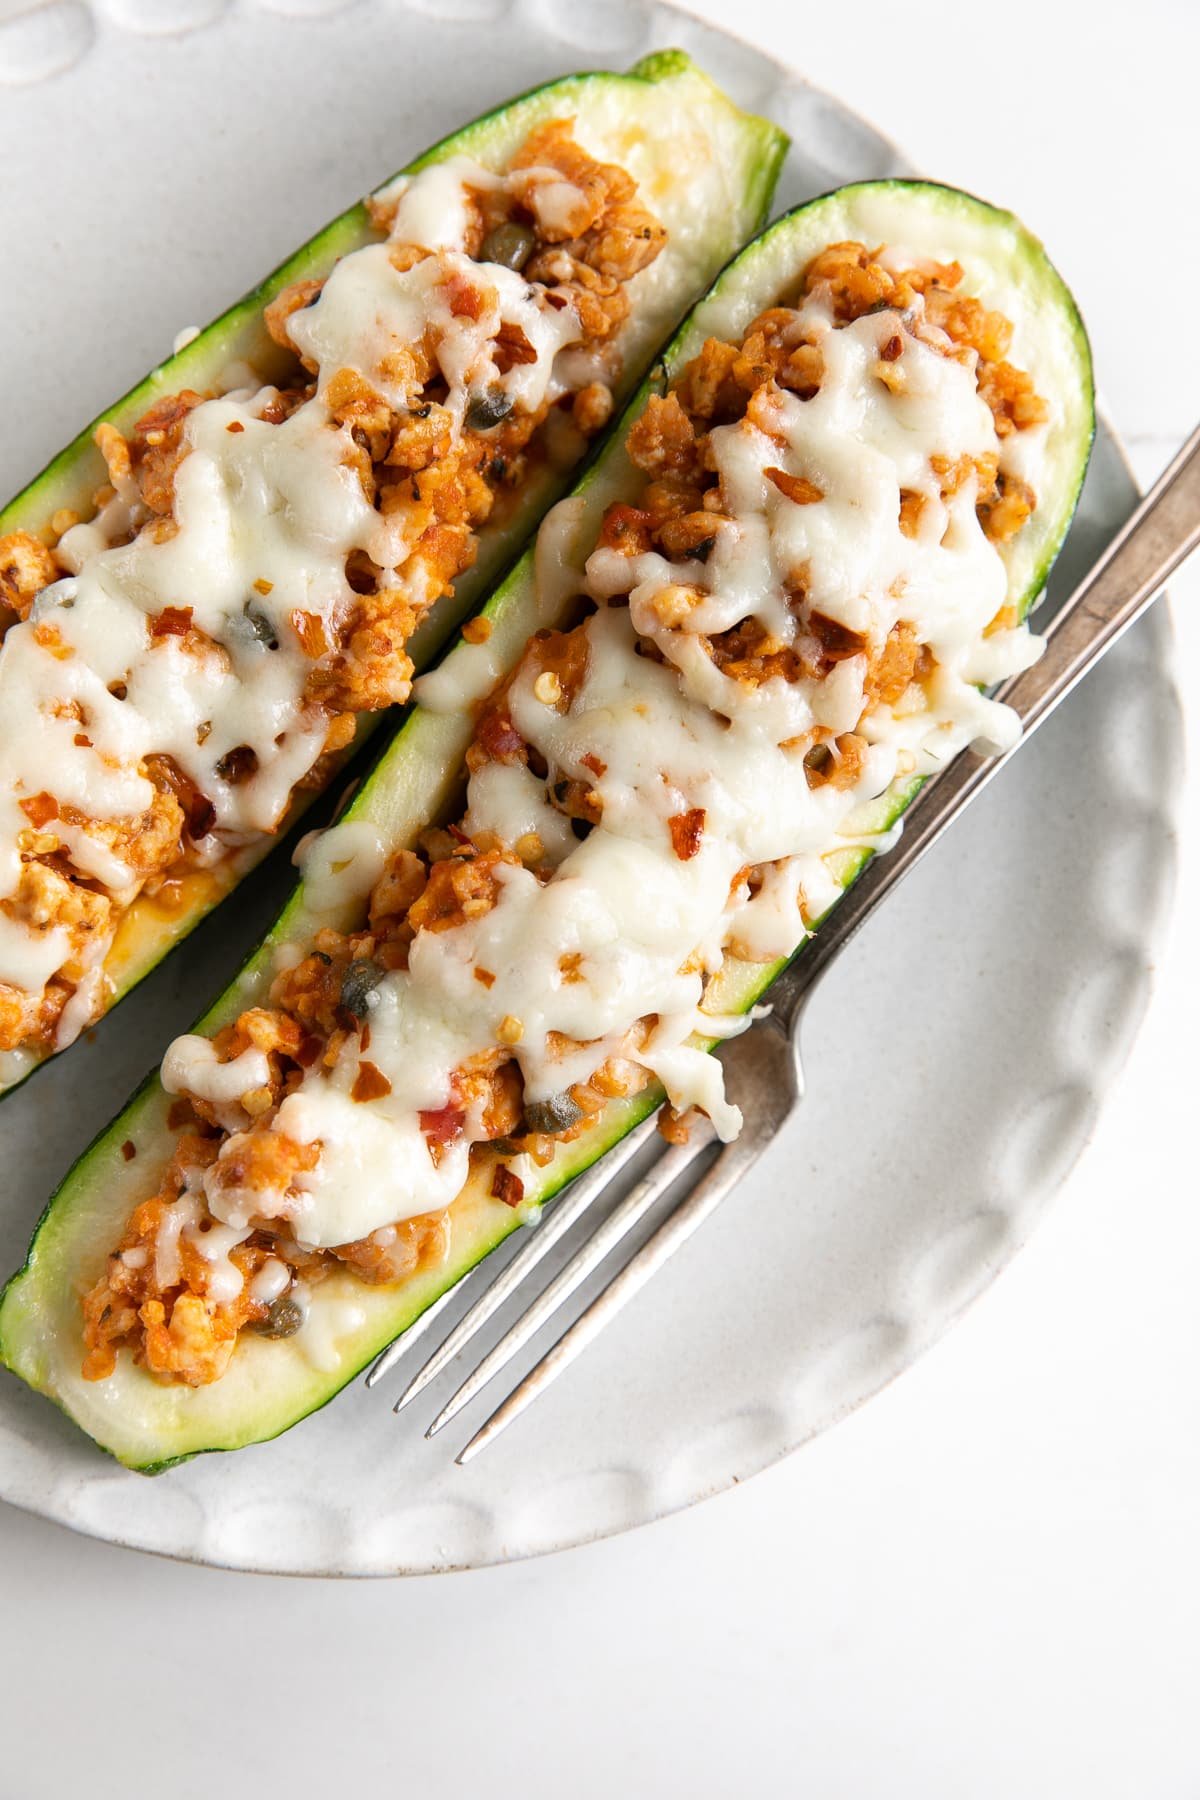 White plate with two stuffed zucchini boats filled with ground sausage and topped with melted cheese,